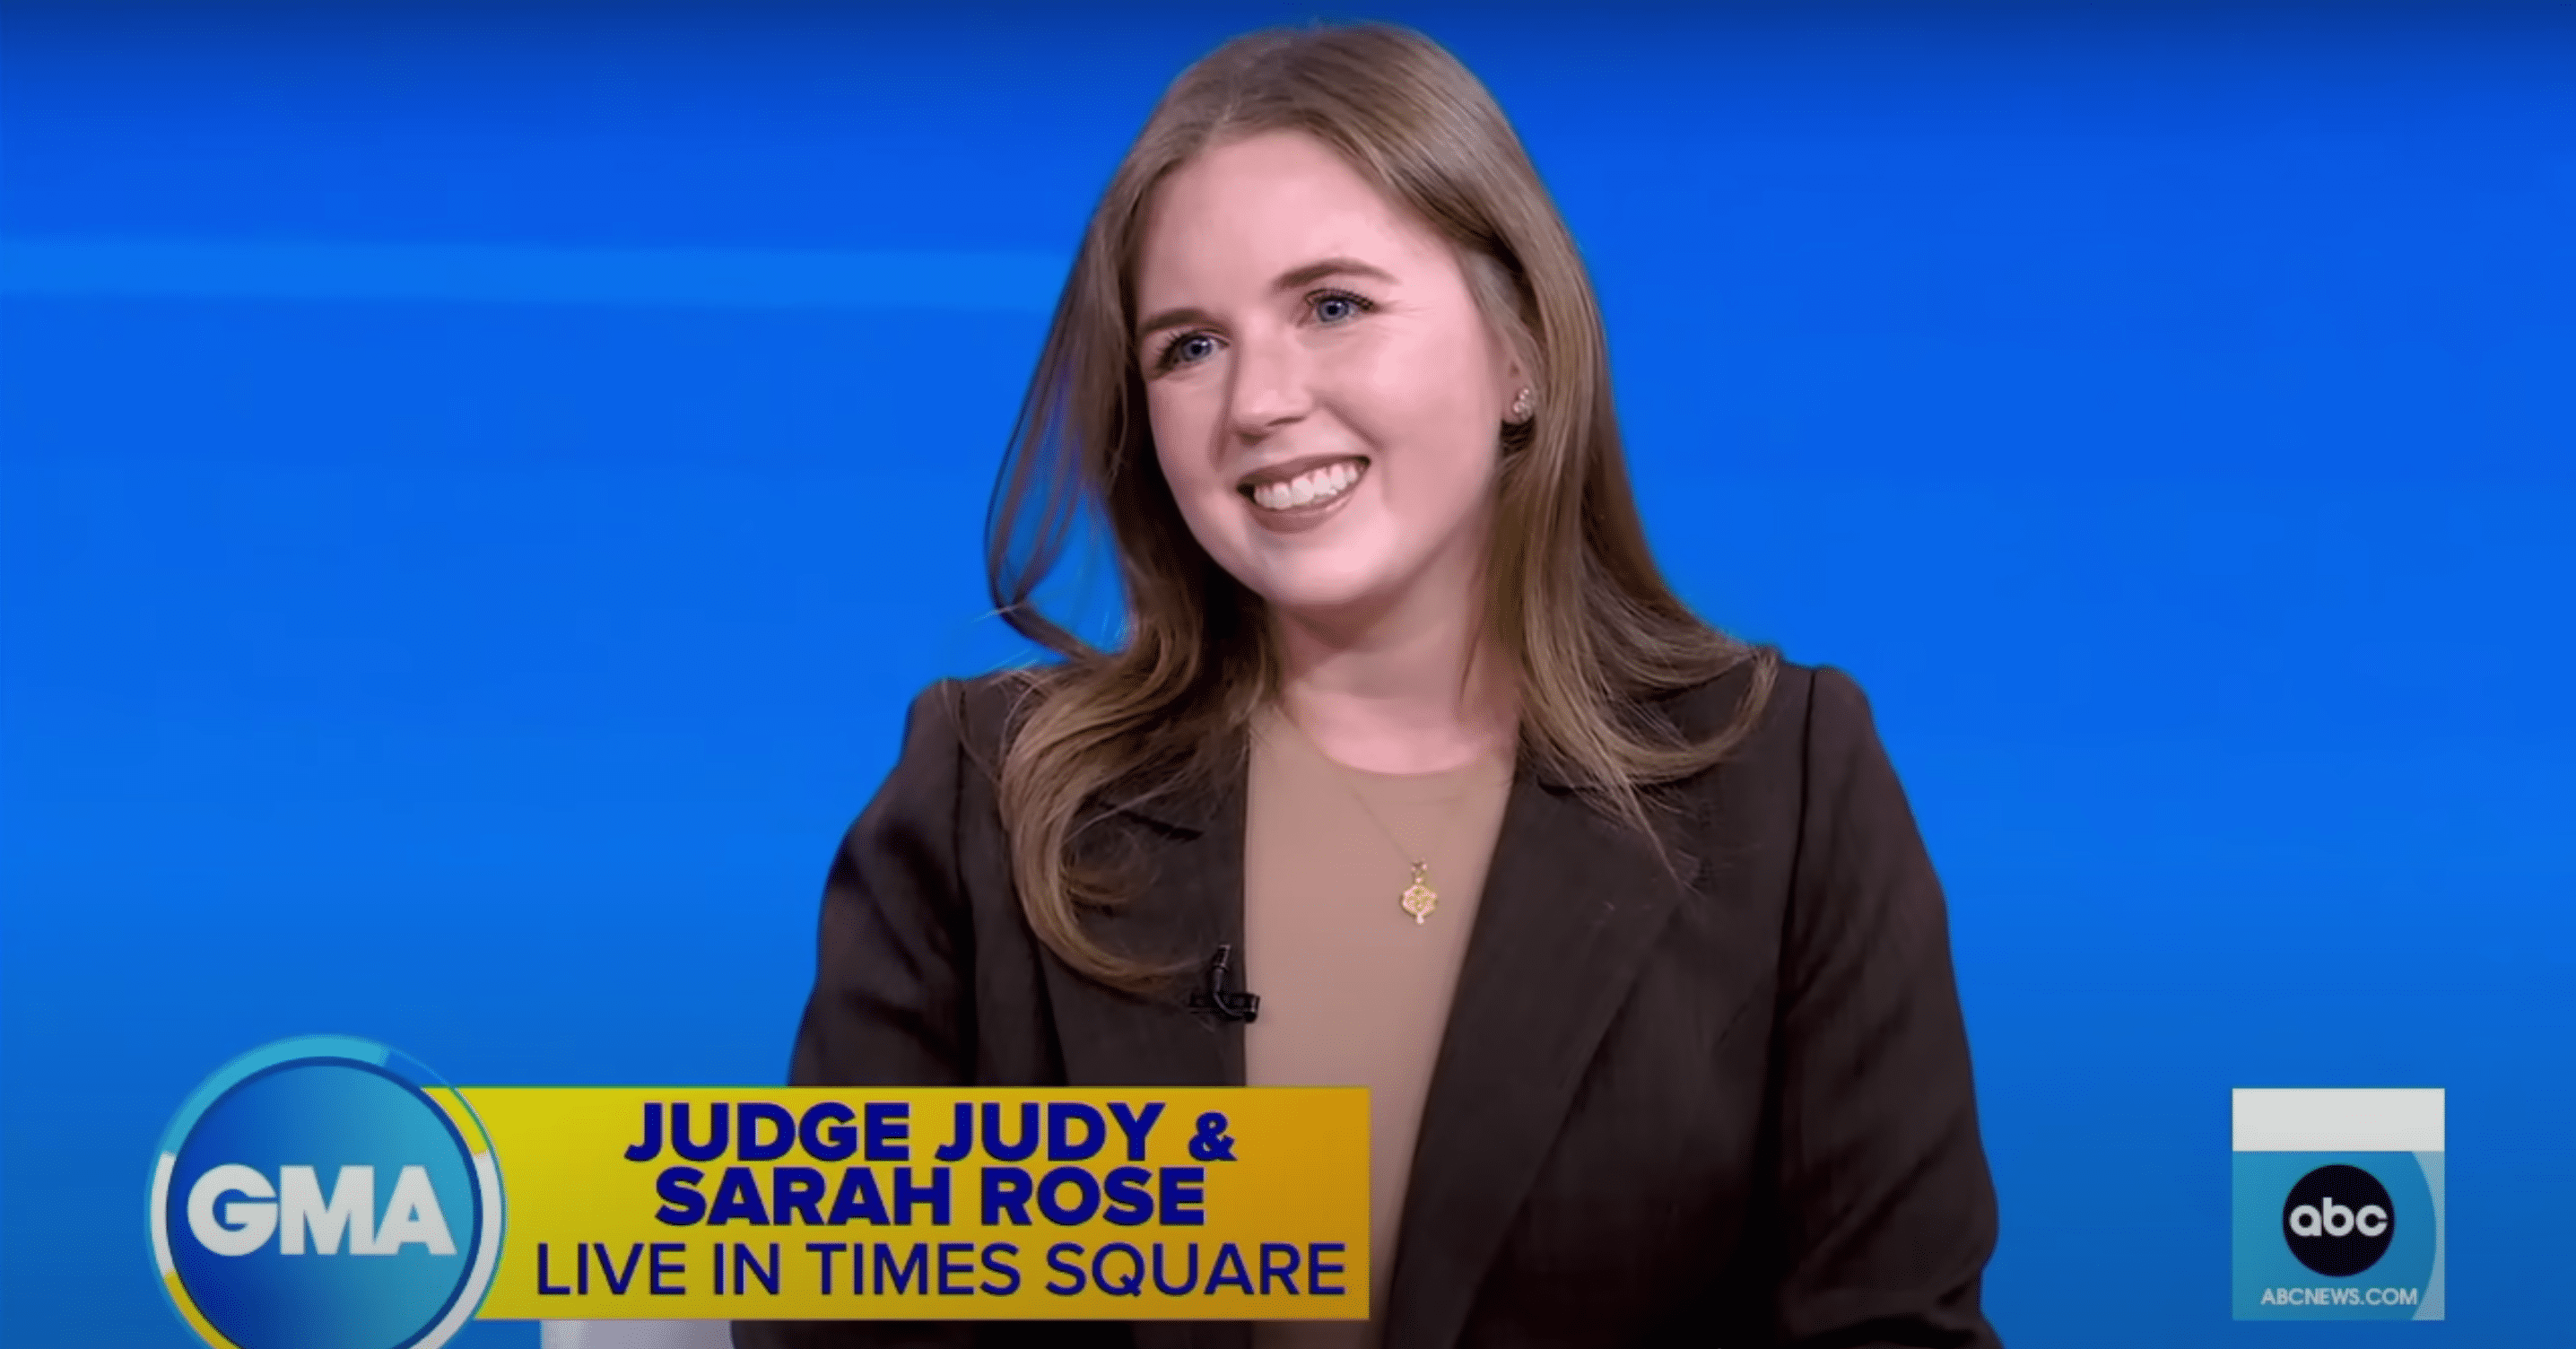 Sarah Rose in an interview | Source: GoodMorningAmerica